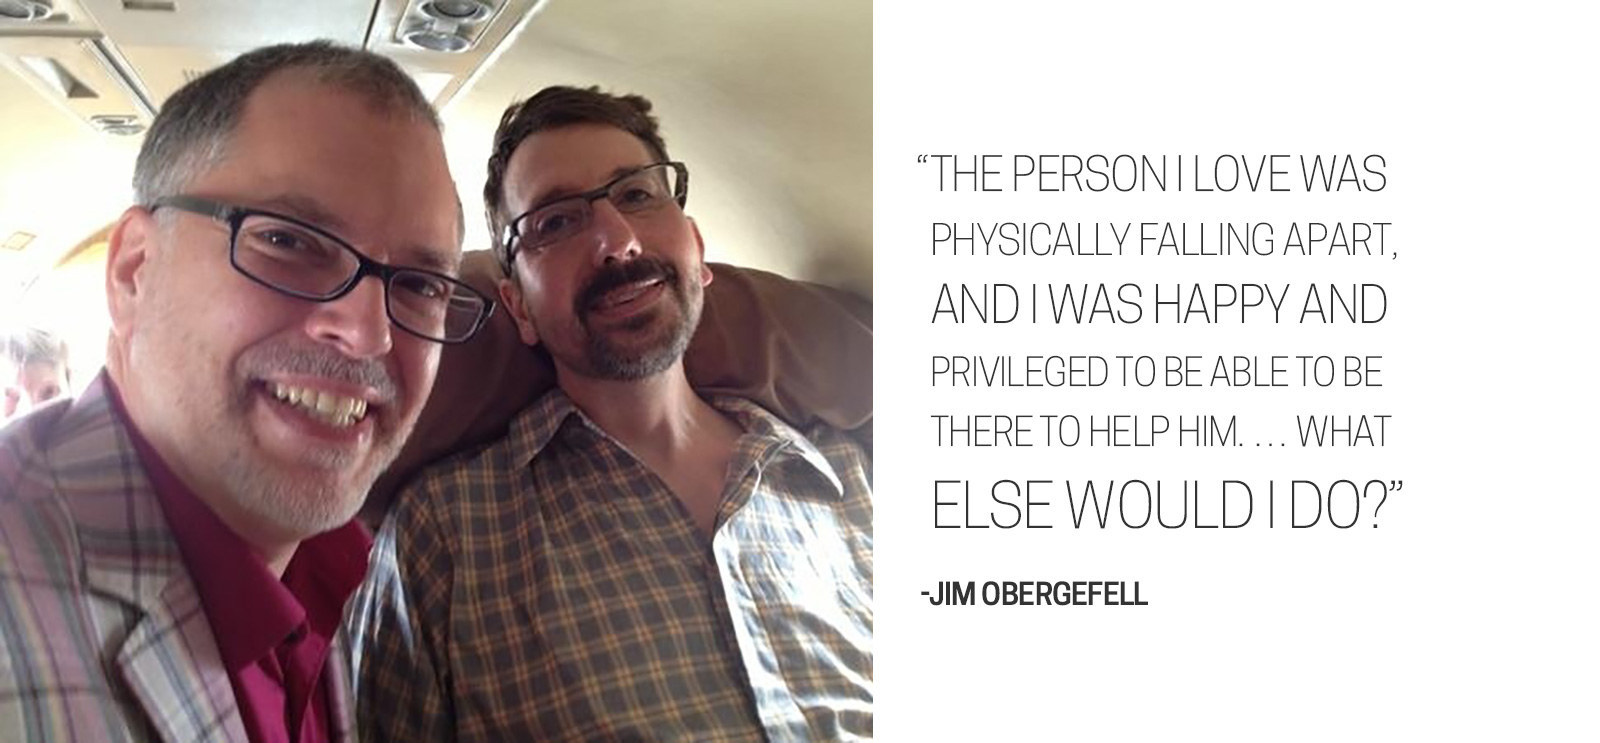 His Husband Died In 2013 But Jim Obergefell Is Still